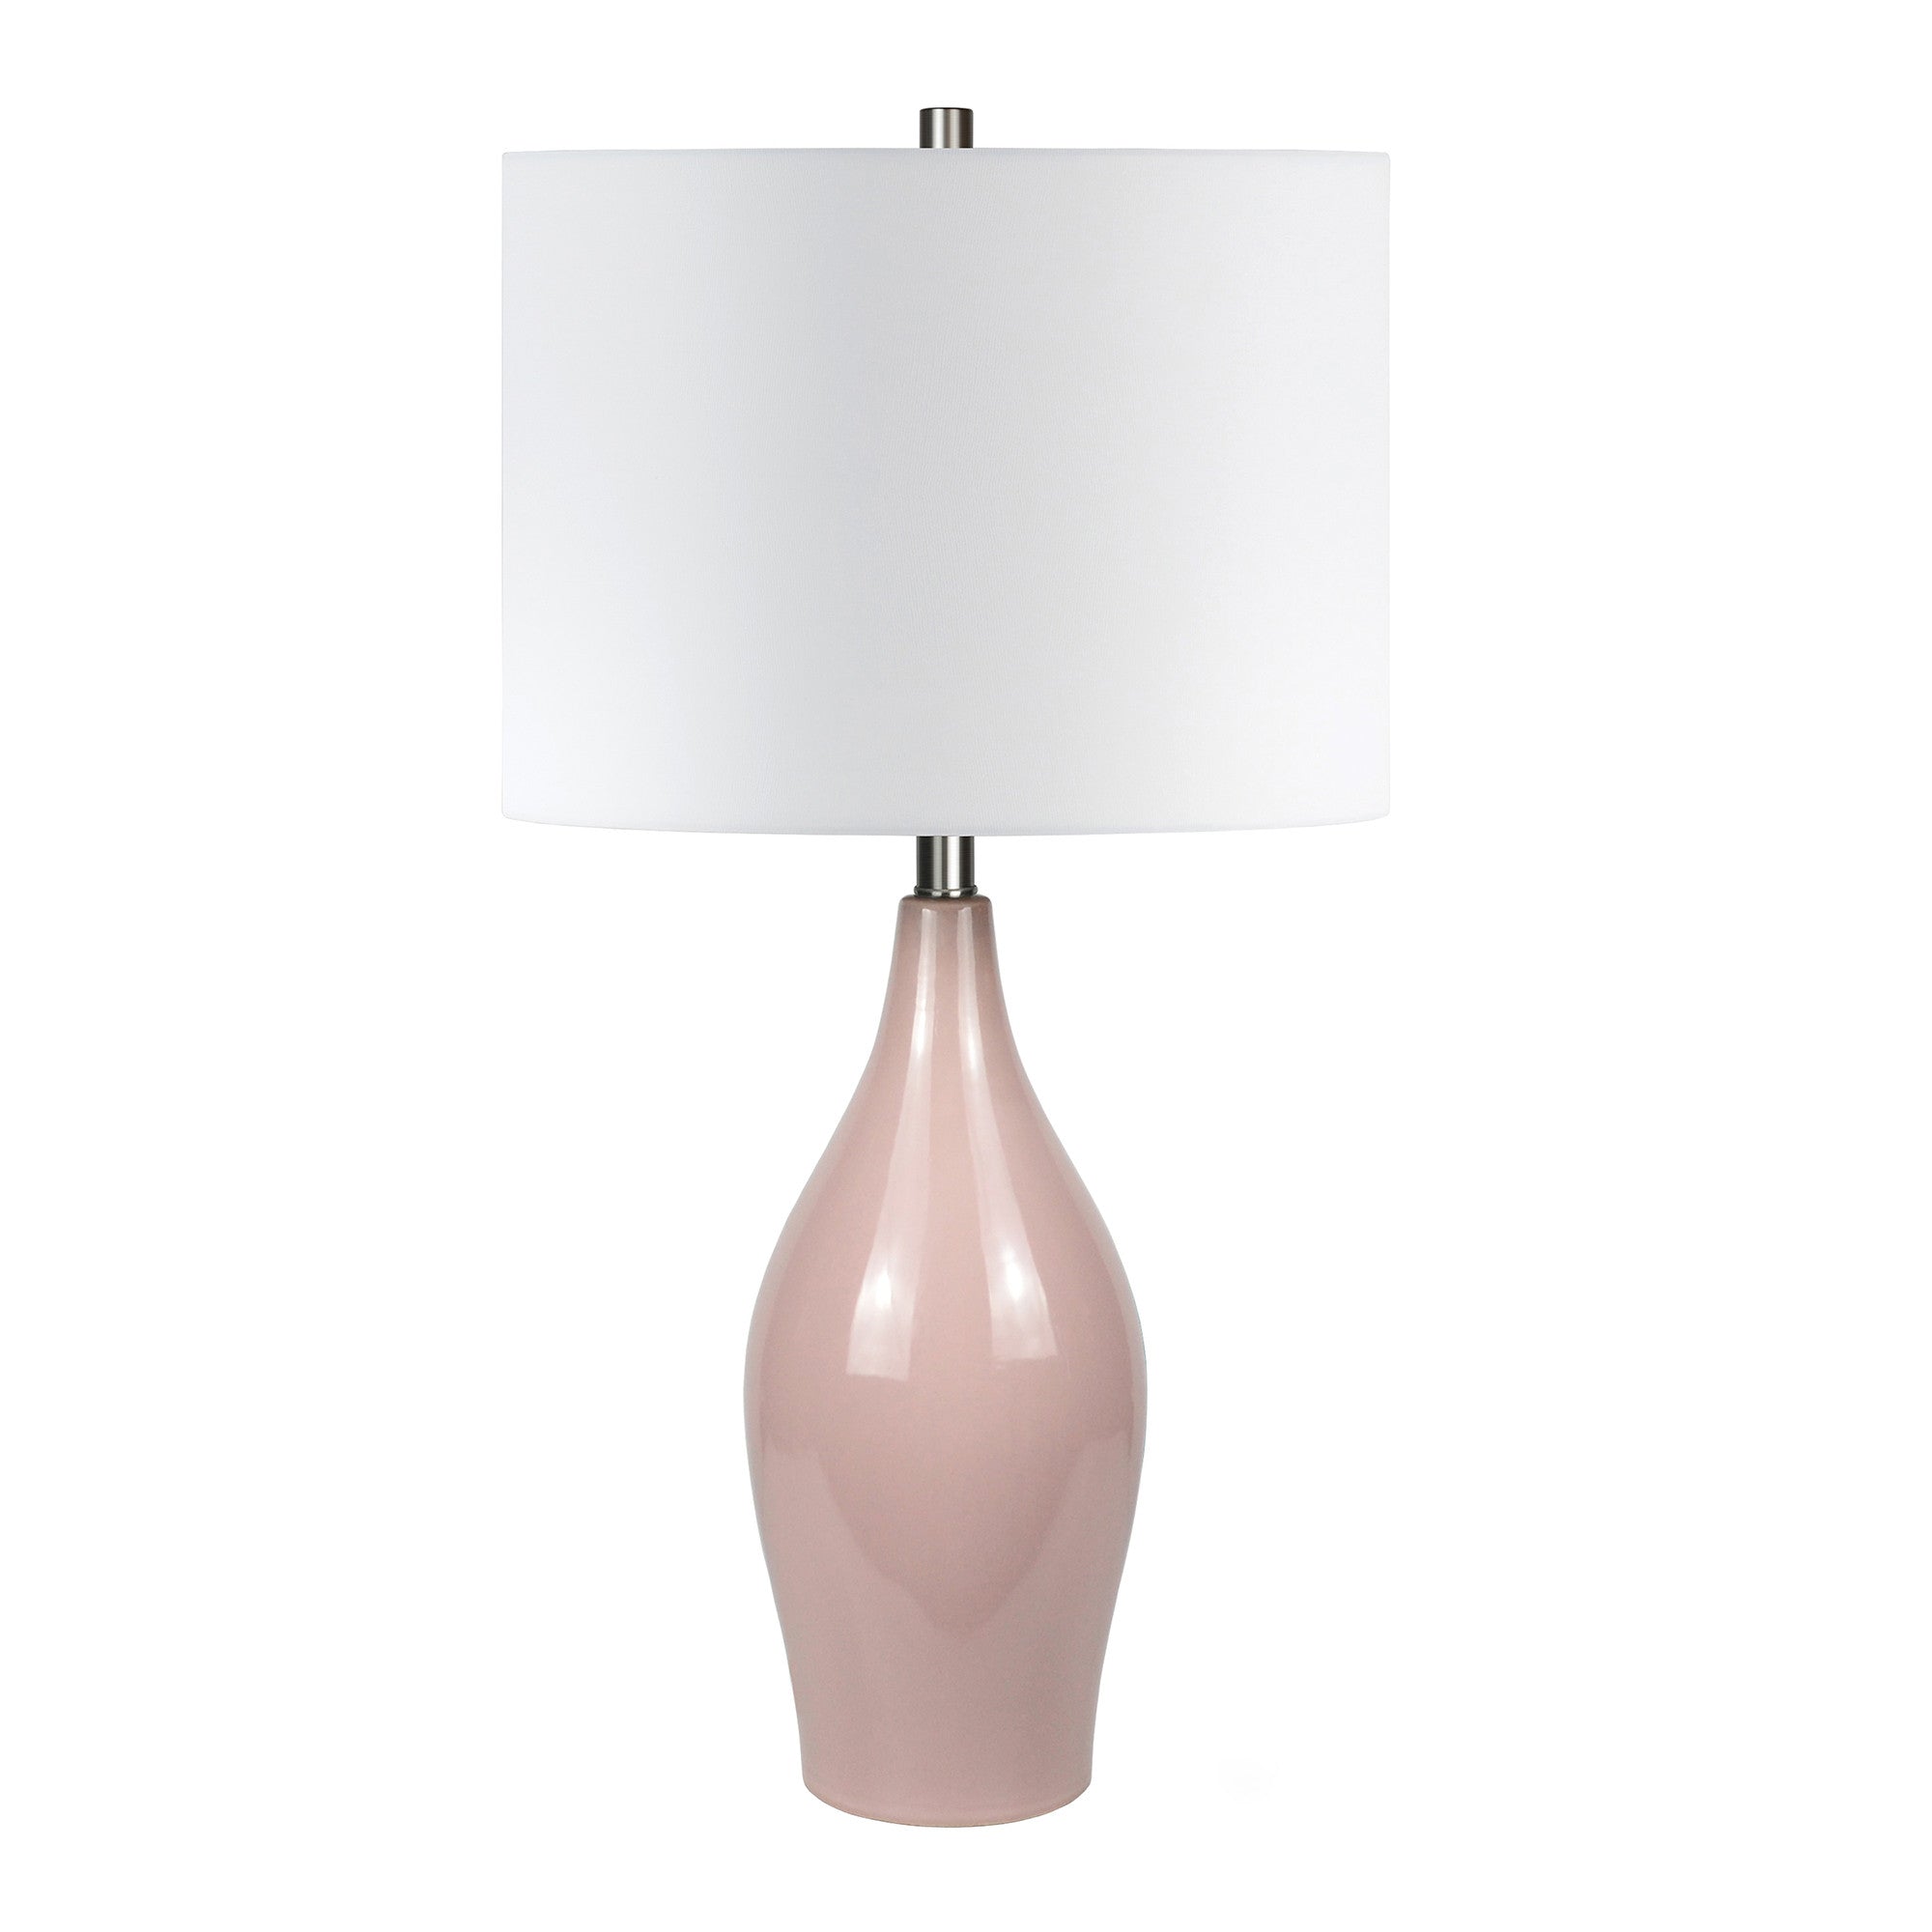 28" Dusty Rose Porcelain Cylinder Table Lamp With White Drum Shade